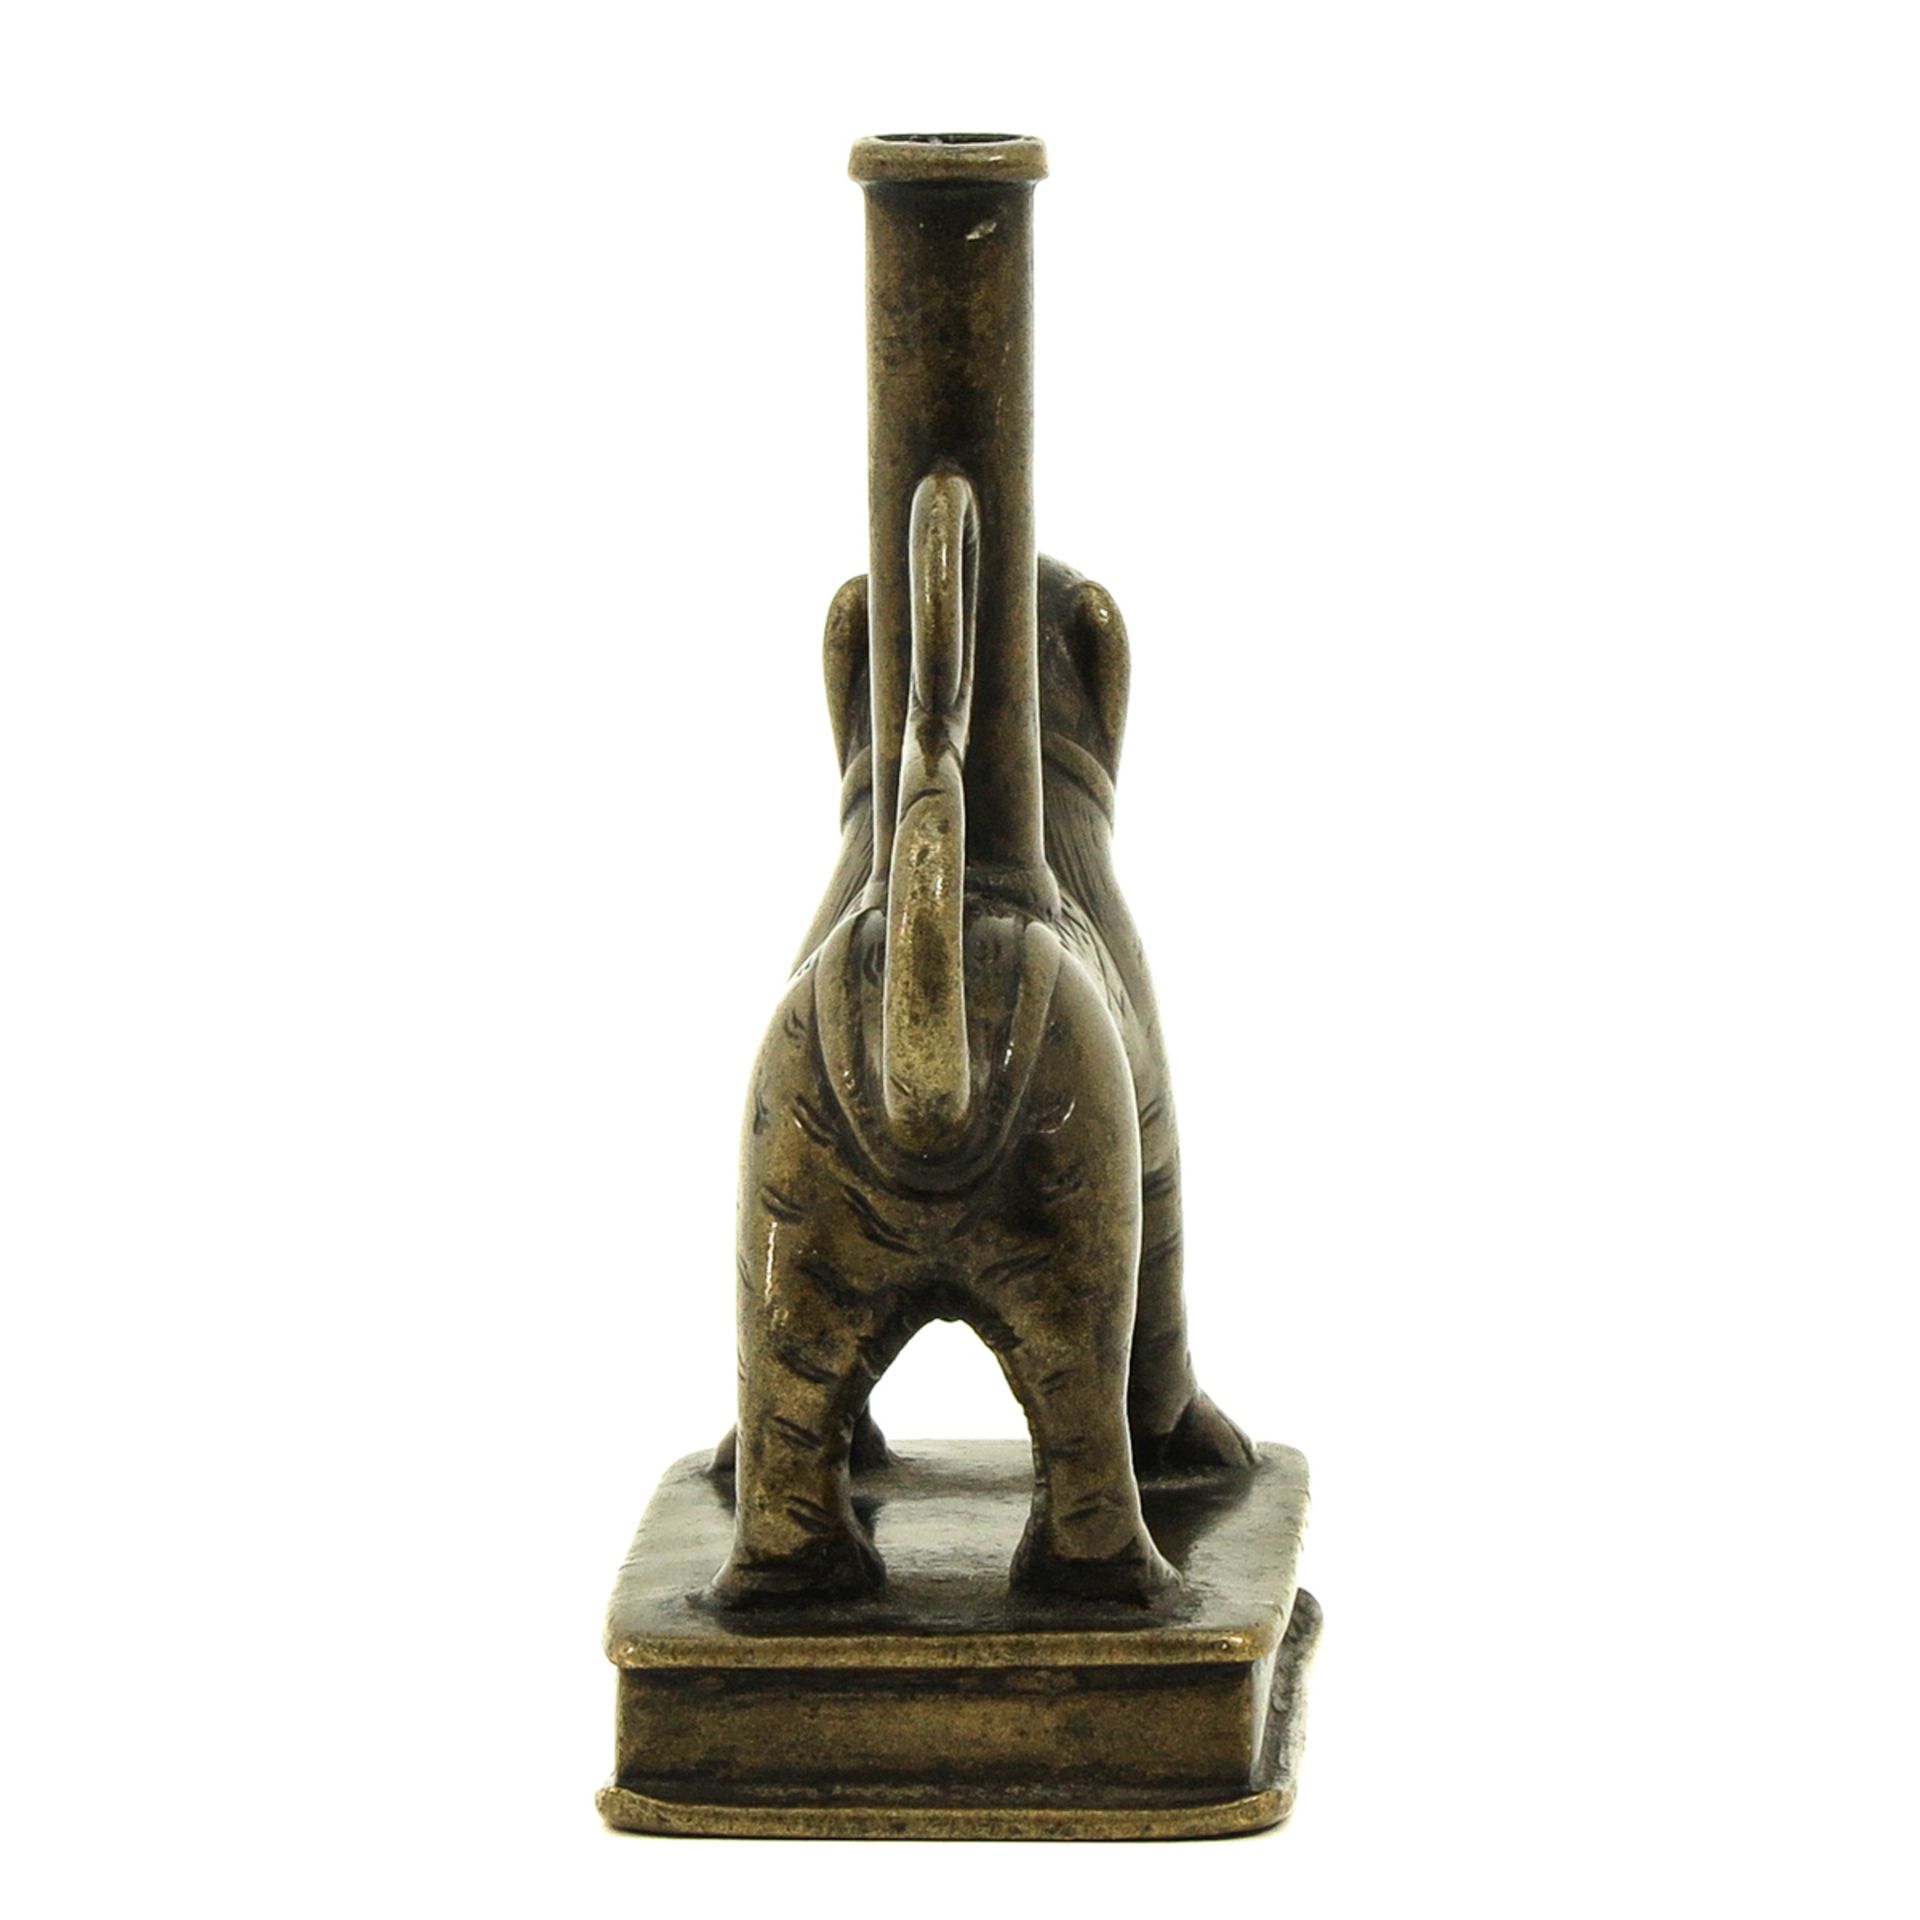 A 16th Century Candlestick - Image 3 of 8